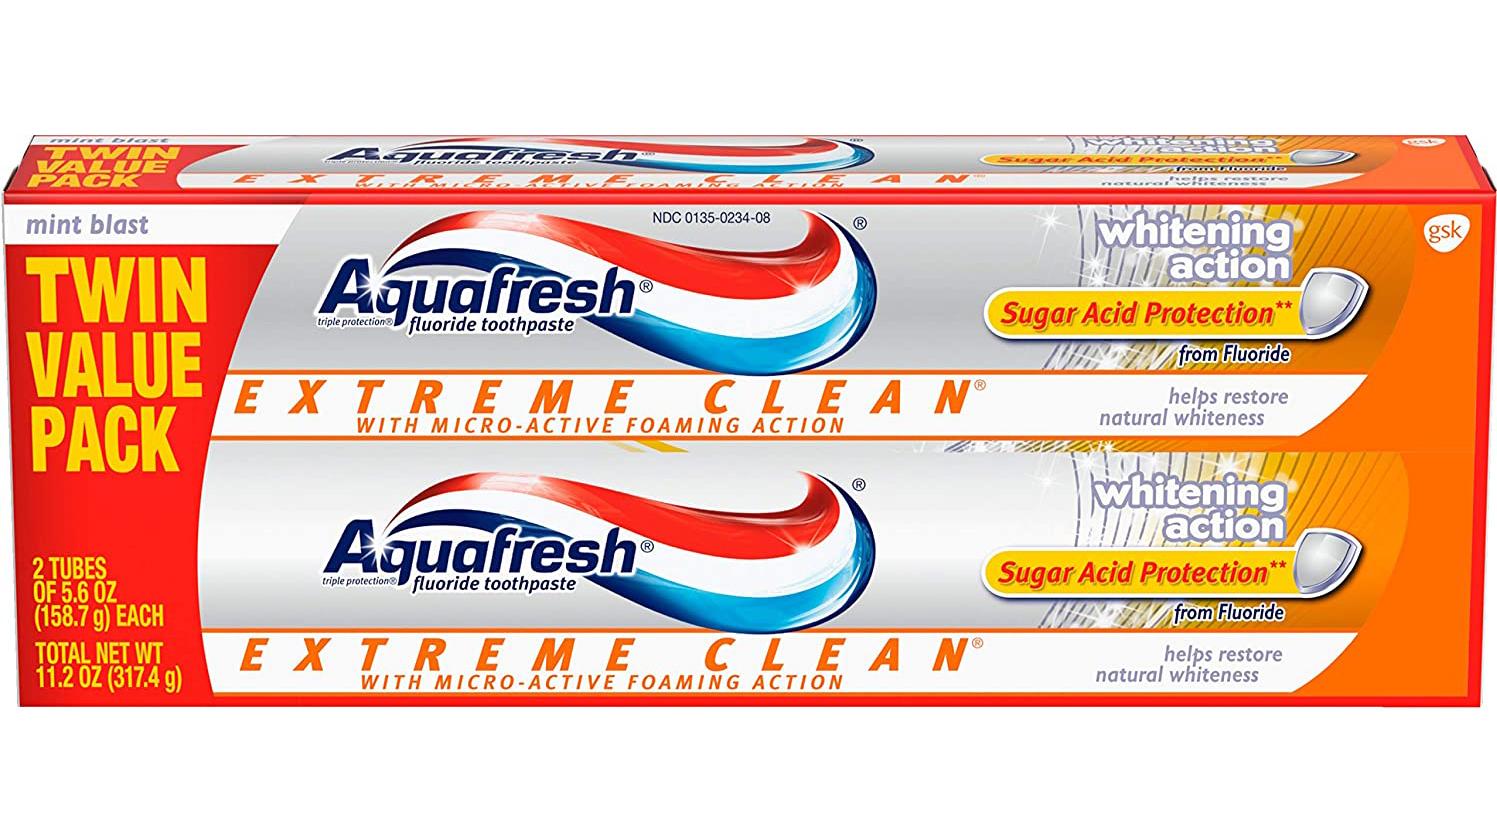 2 Aquafresh Extreme Clean Whitening Action Fluoride Toothpaste for $3.28 Shipped